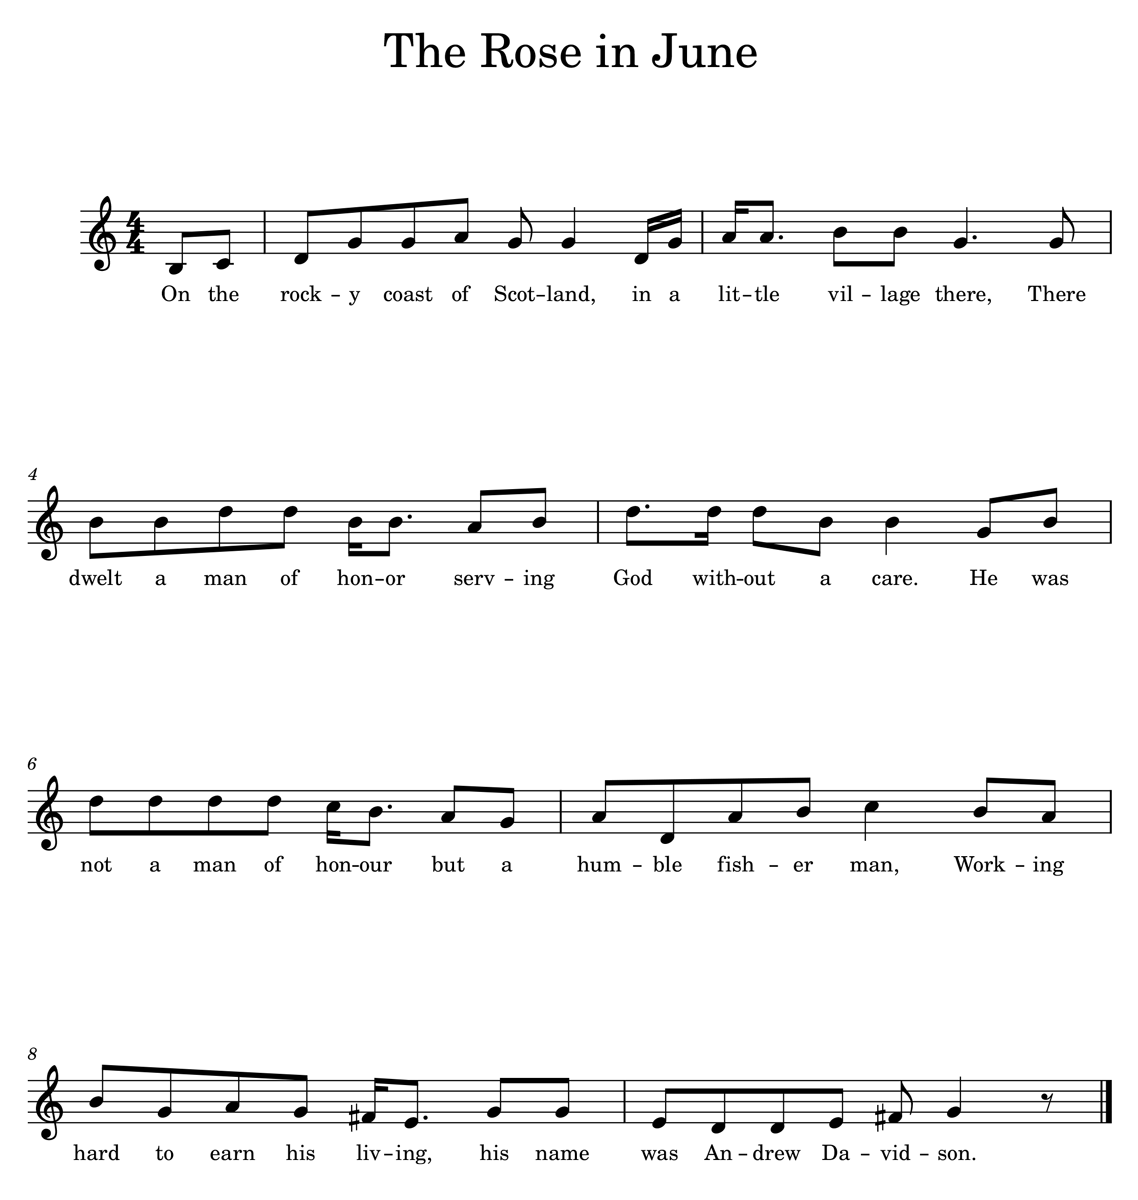 Sheet music for "The Rose in June"